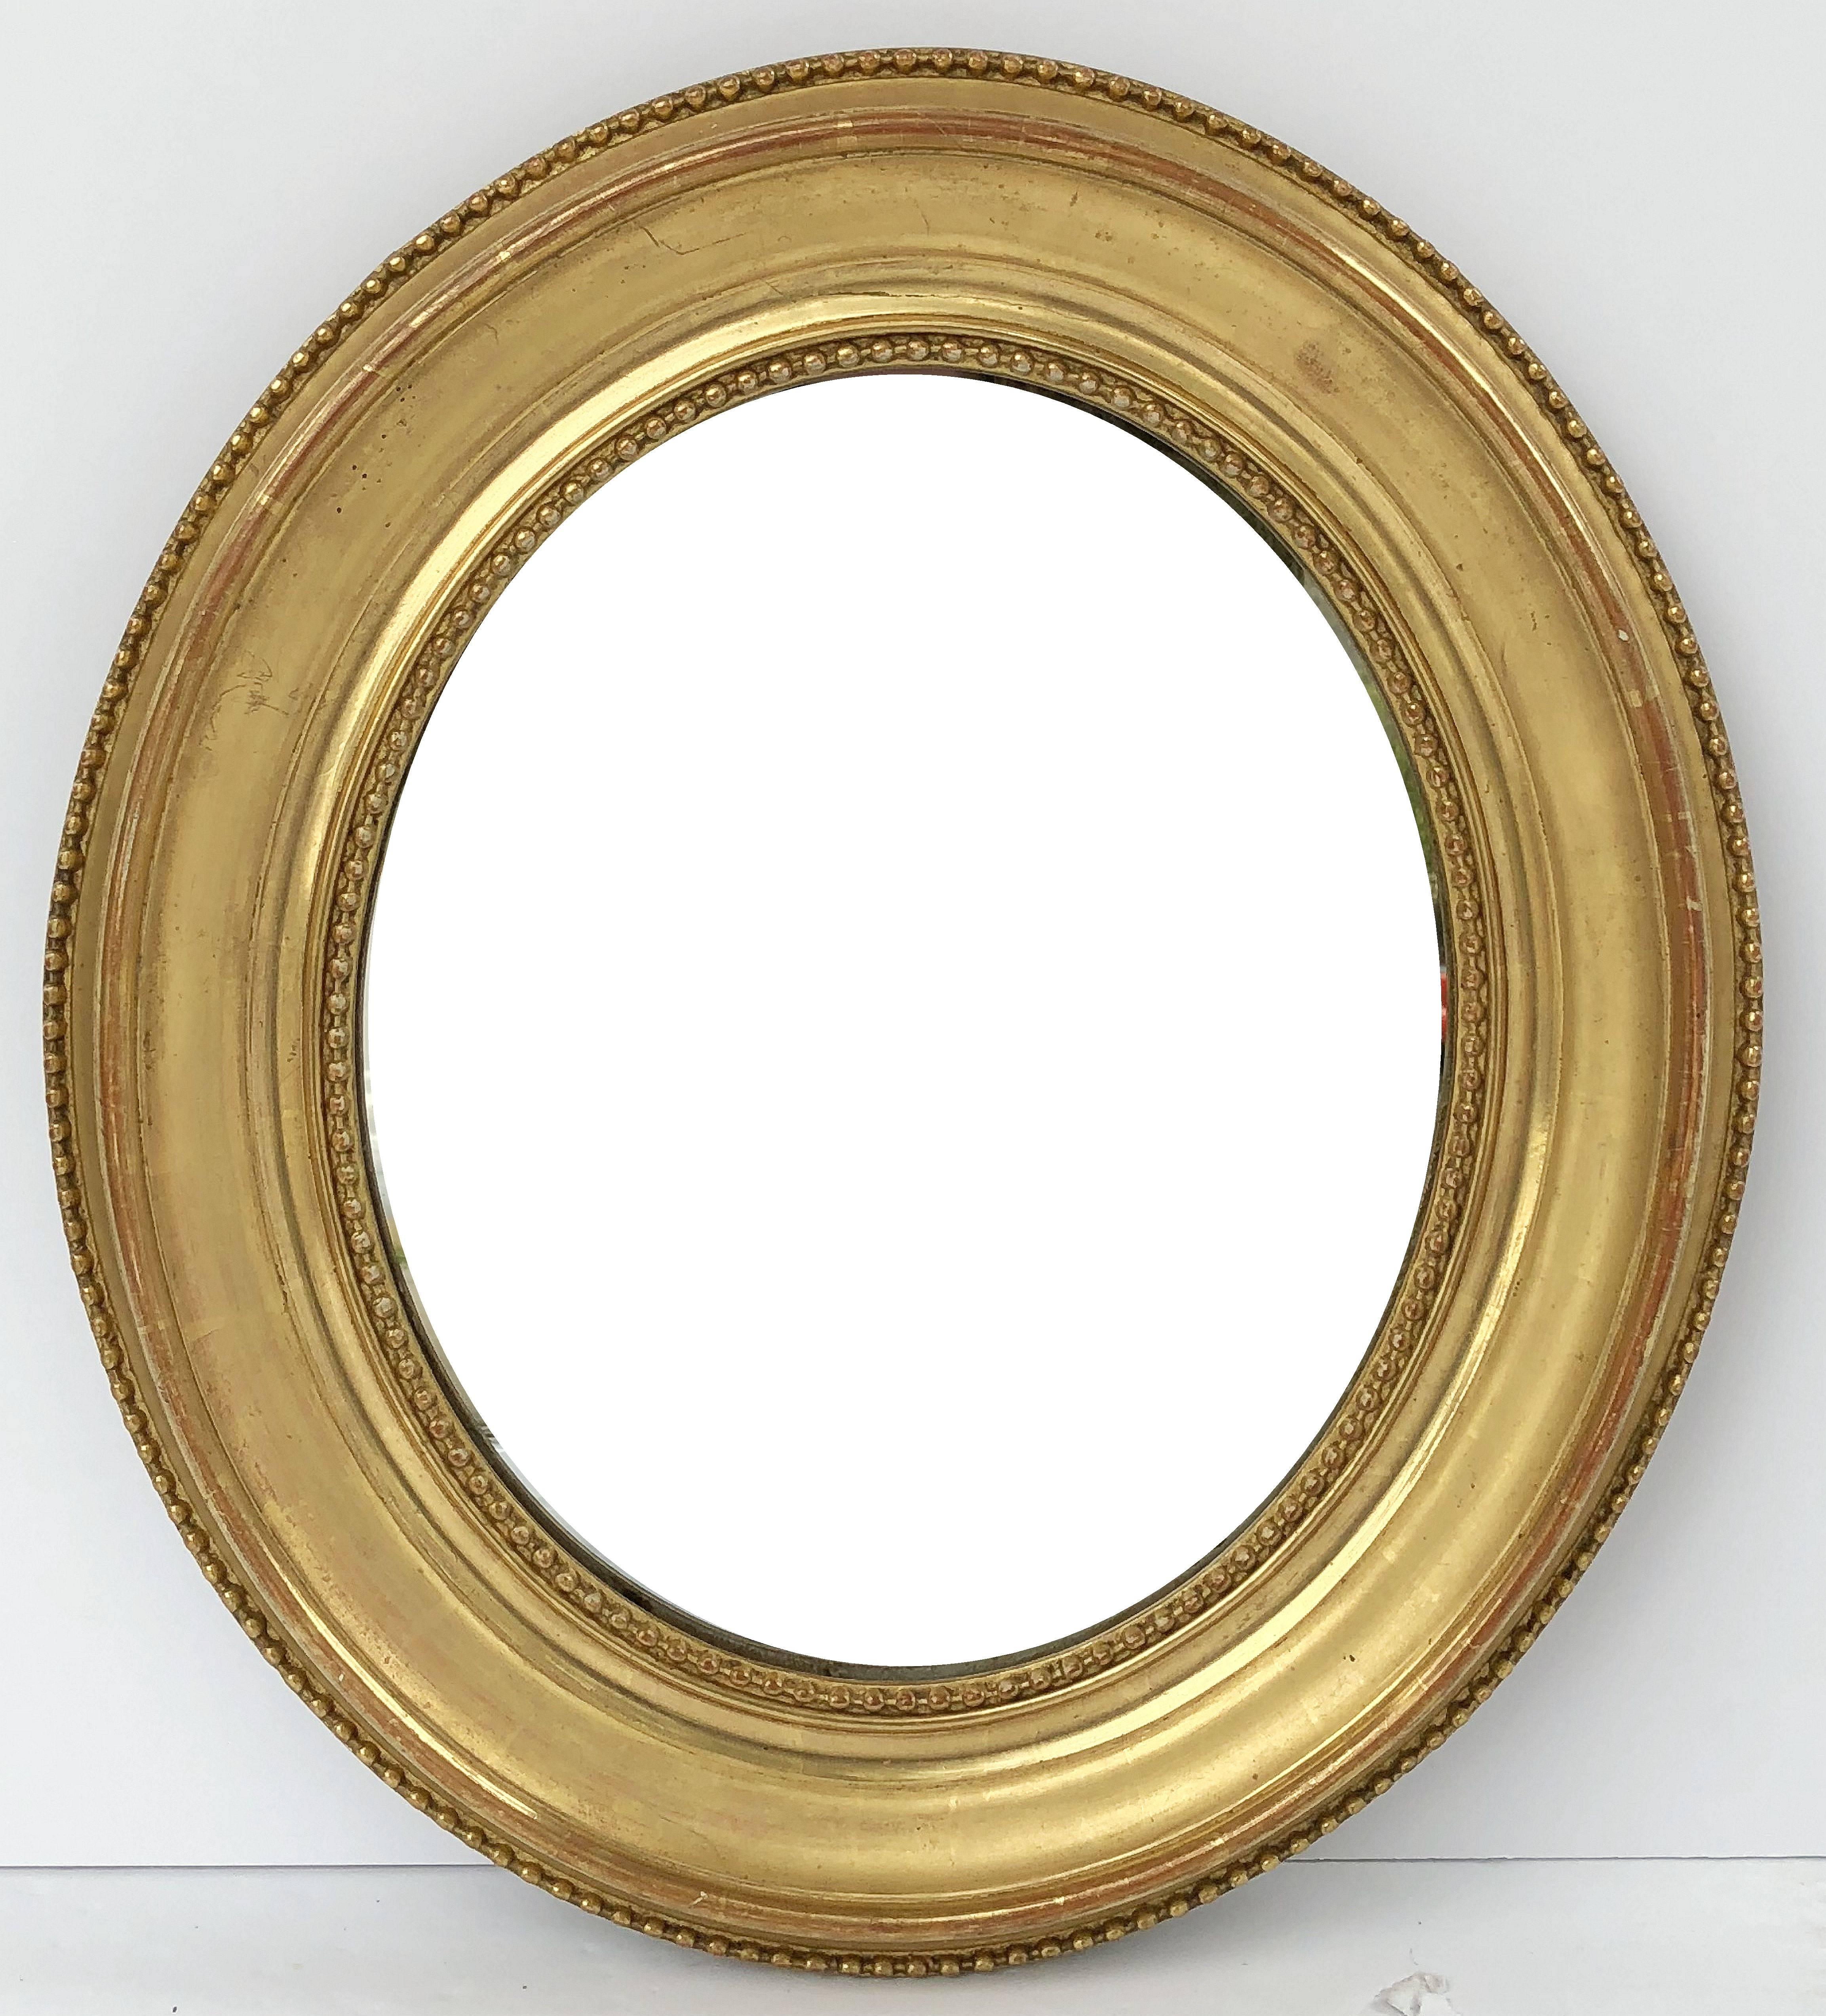 A fine pair of Louis Philippe oval framed gilt mirrors from France, each mirror featuring a beaded gilt moulding around an oval glass.

Dimensions are H 17 1/4 inches x W 15 inches 

Two available - Individually priced - $1295 each mirror.
  